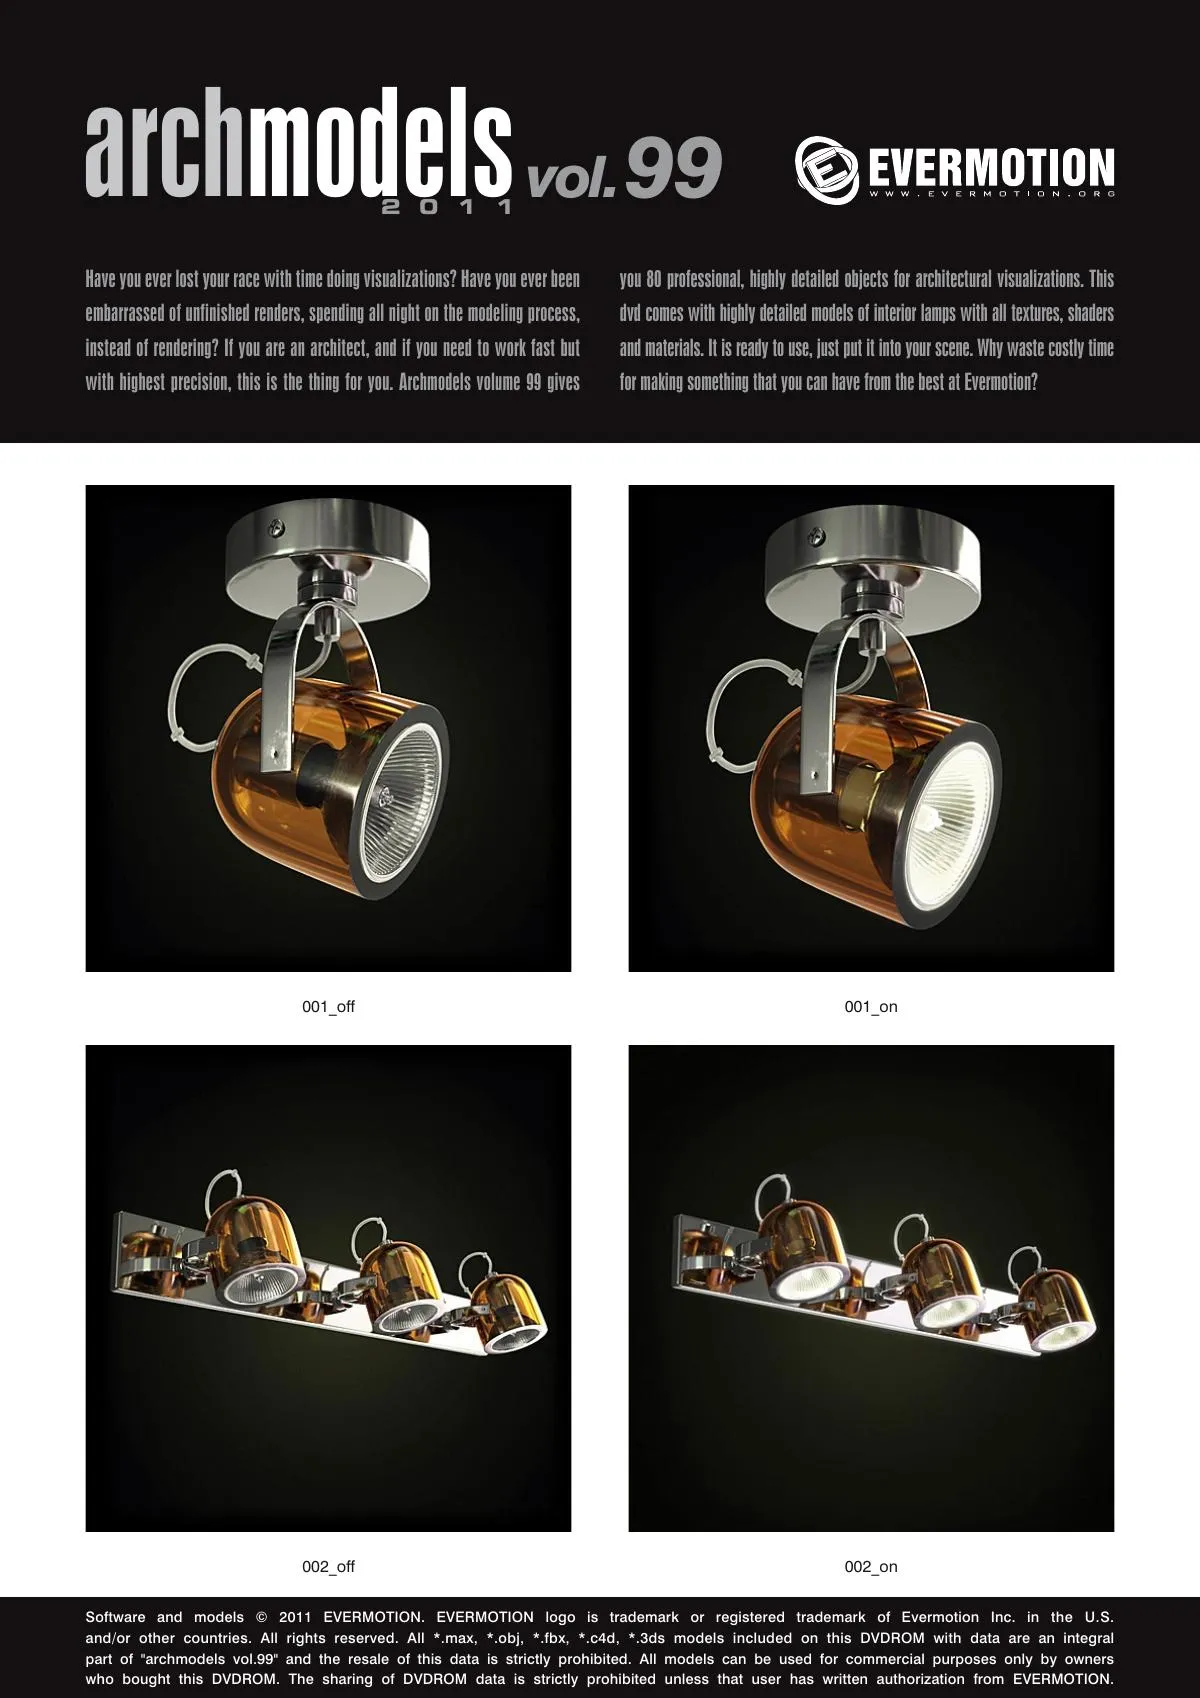 Evermotion Archmodels Vol 099 [lamps]